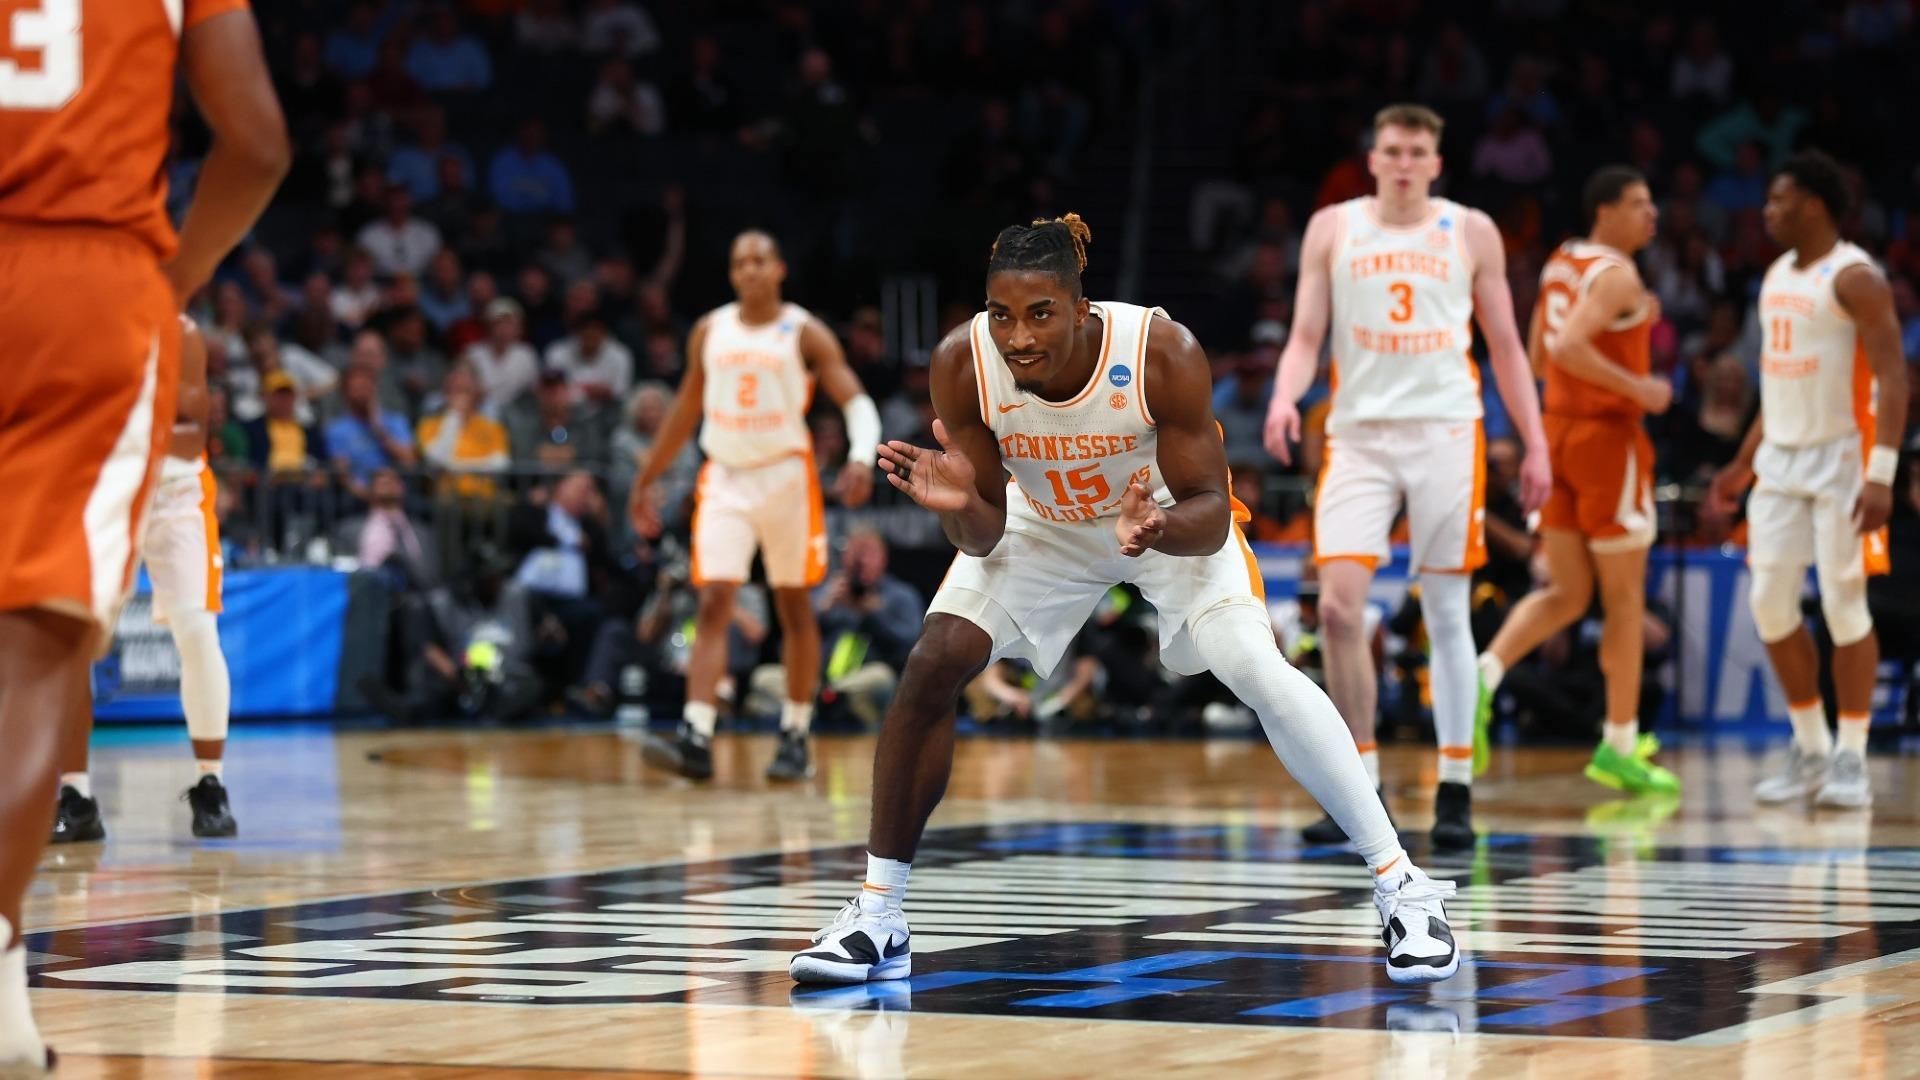 Vols Defeat Texas, 62-58, to Reach Second Straight Sweet 16